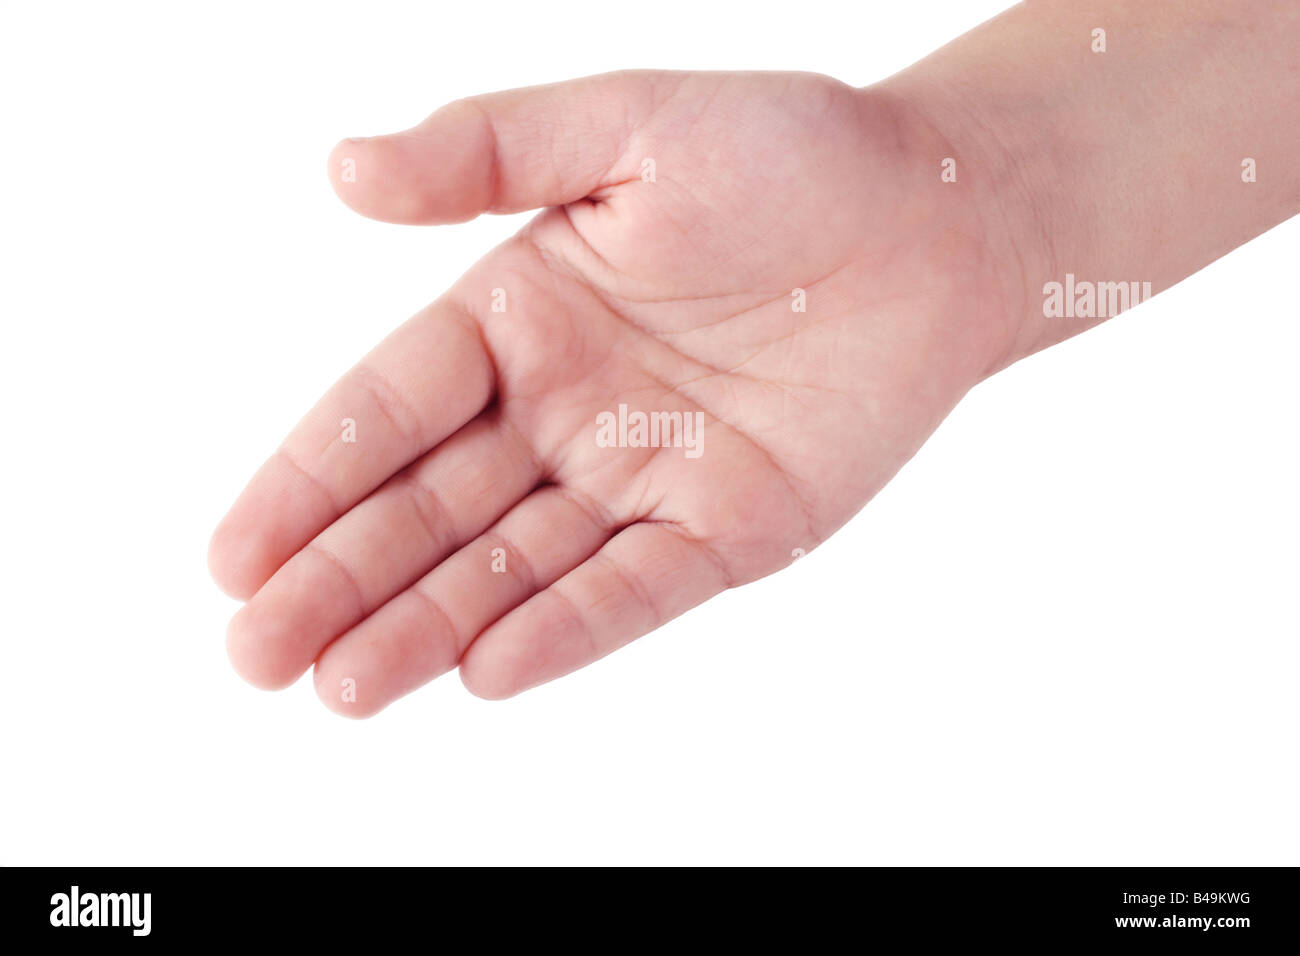 Child s right hand open palm on white background Stock Photo